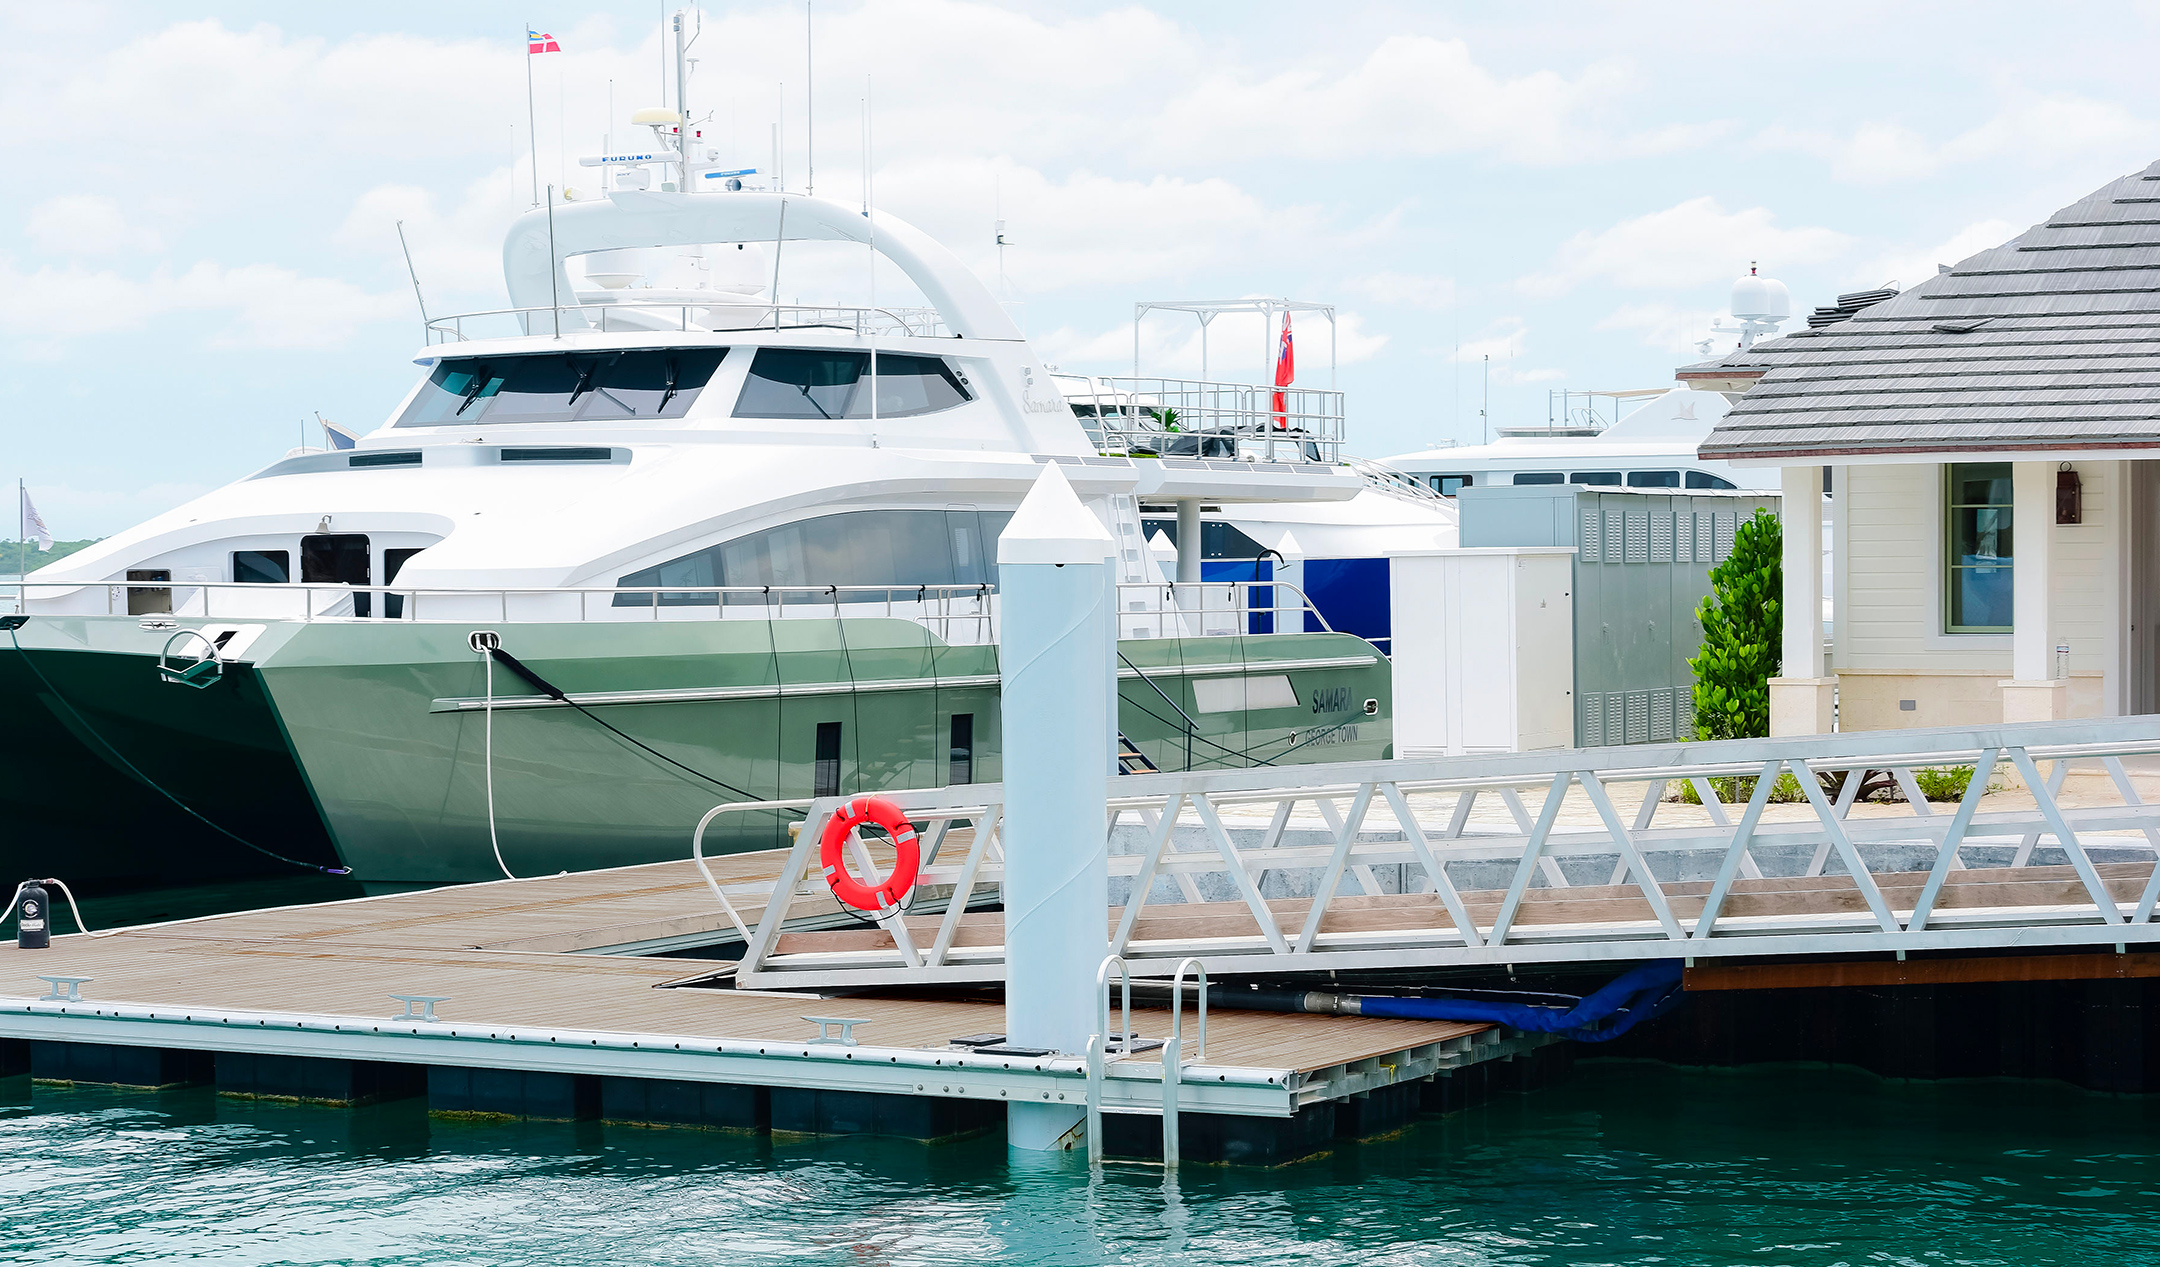 Custom aluminum gangway in the Bahamas leading to dock where yacht is moored